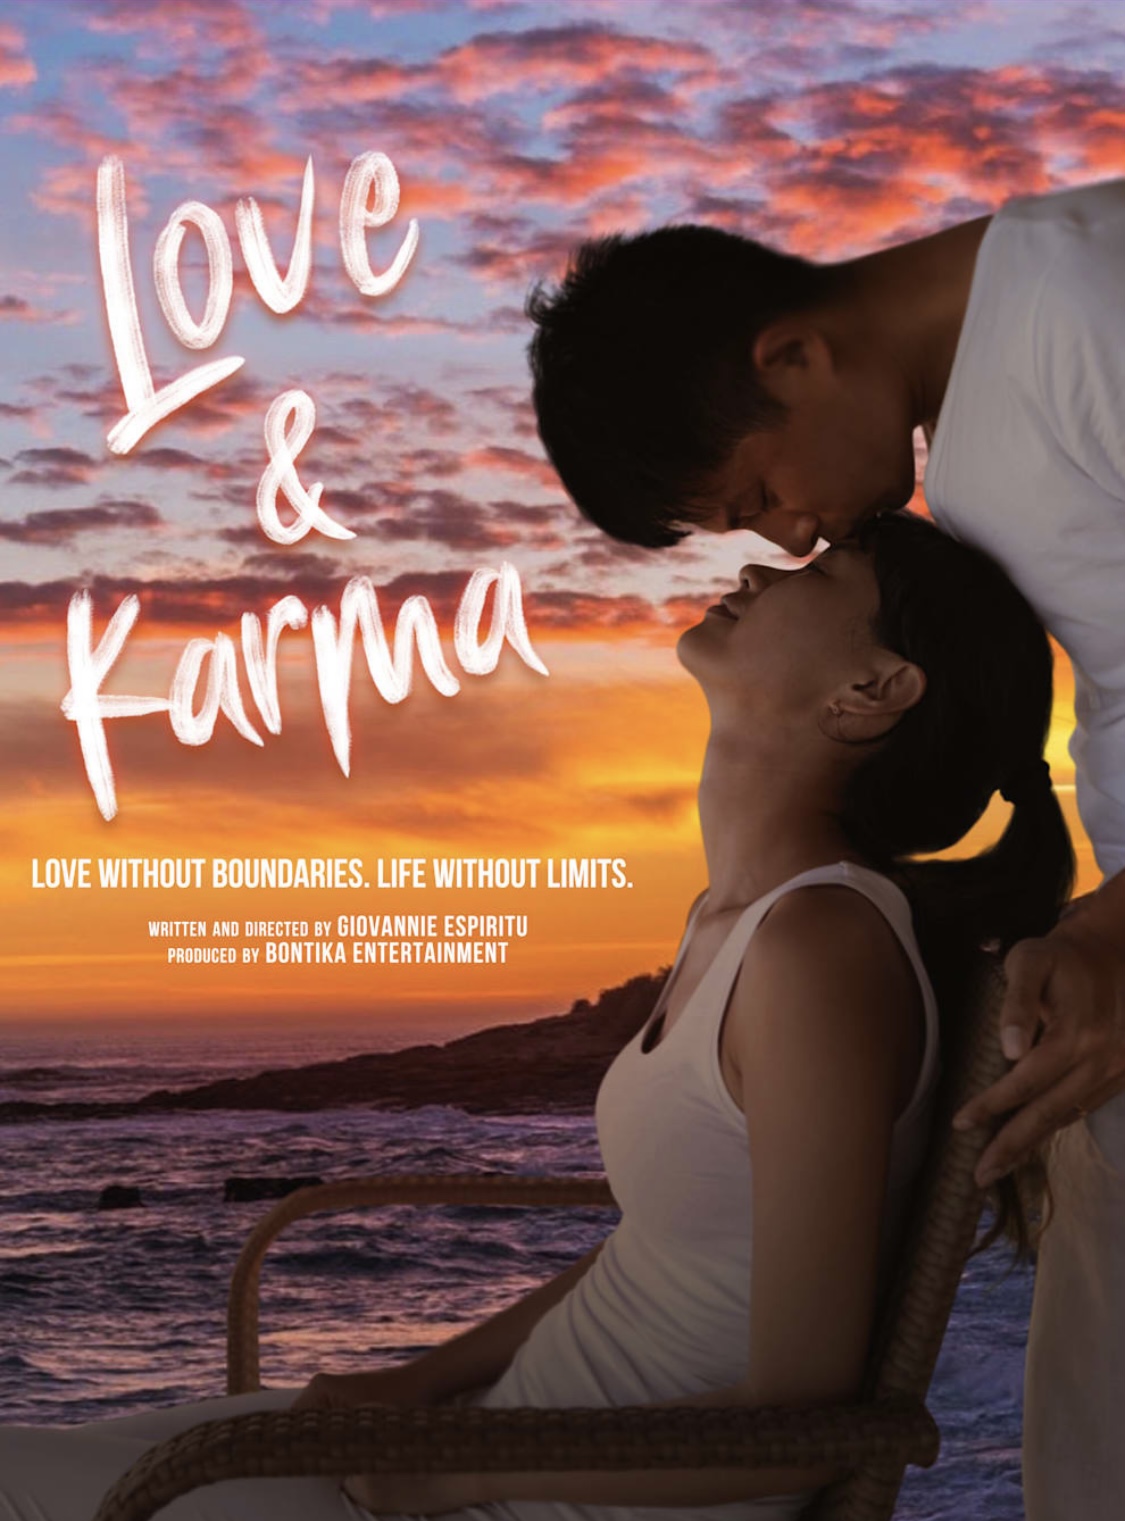 Casting to begin on “Love & Karma,” produced by Bontika Entertainment. 14